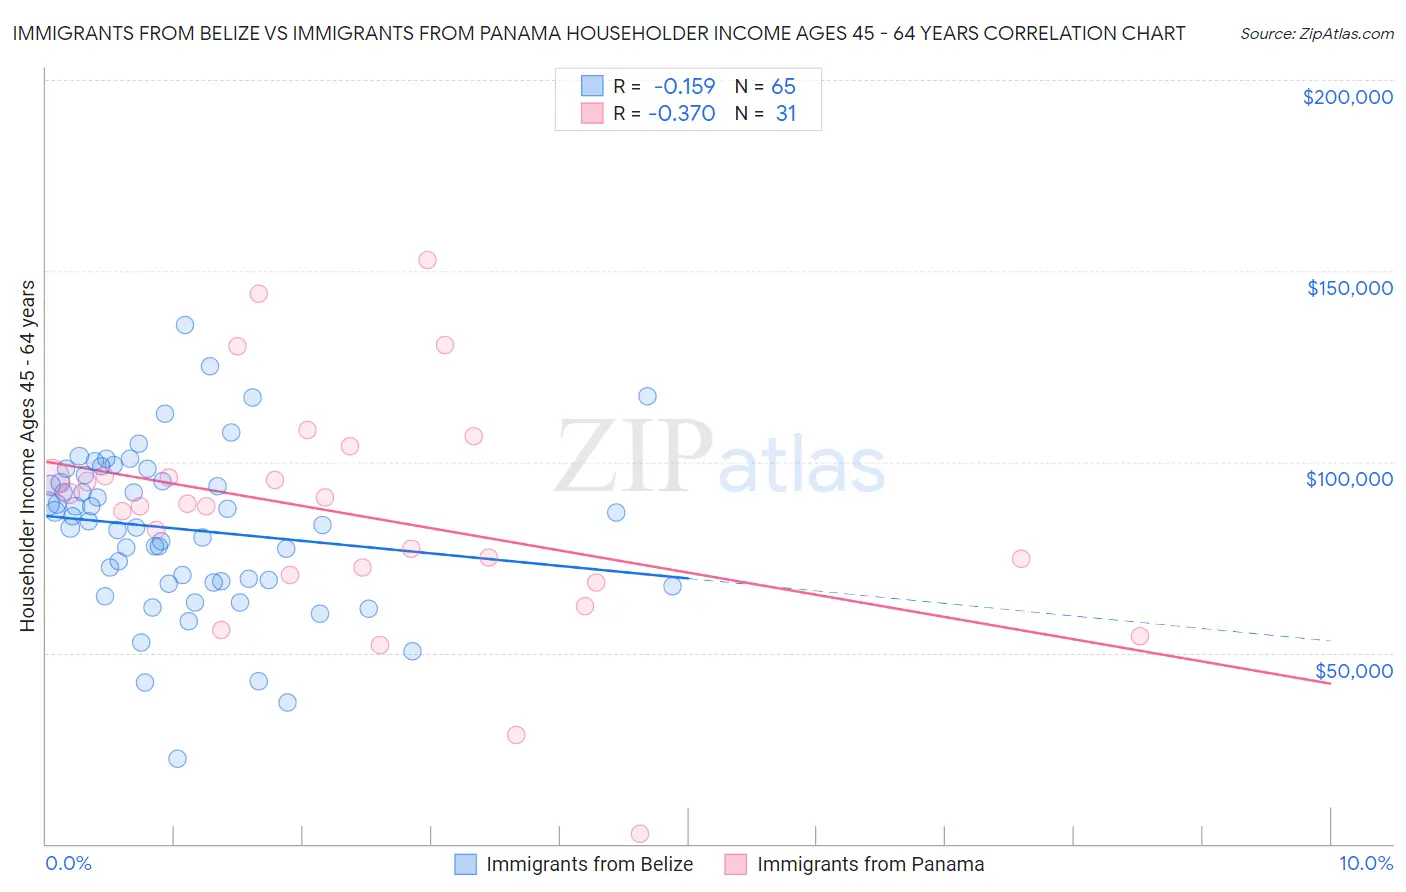 Immigrants from Belize vs Immigrants from Panama Householder Income Ages 45 - 64 years